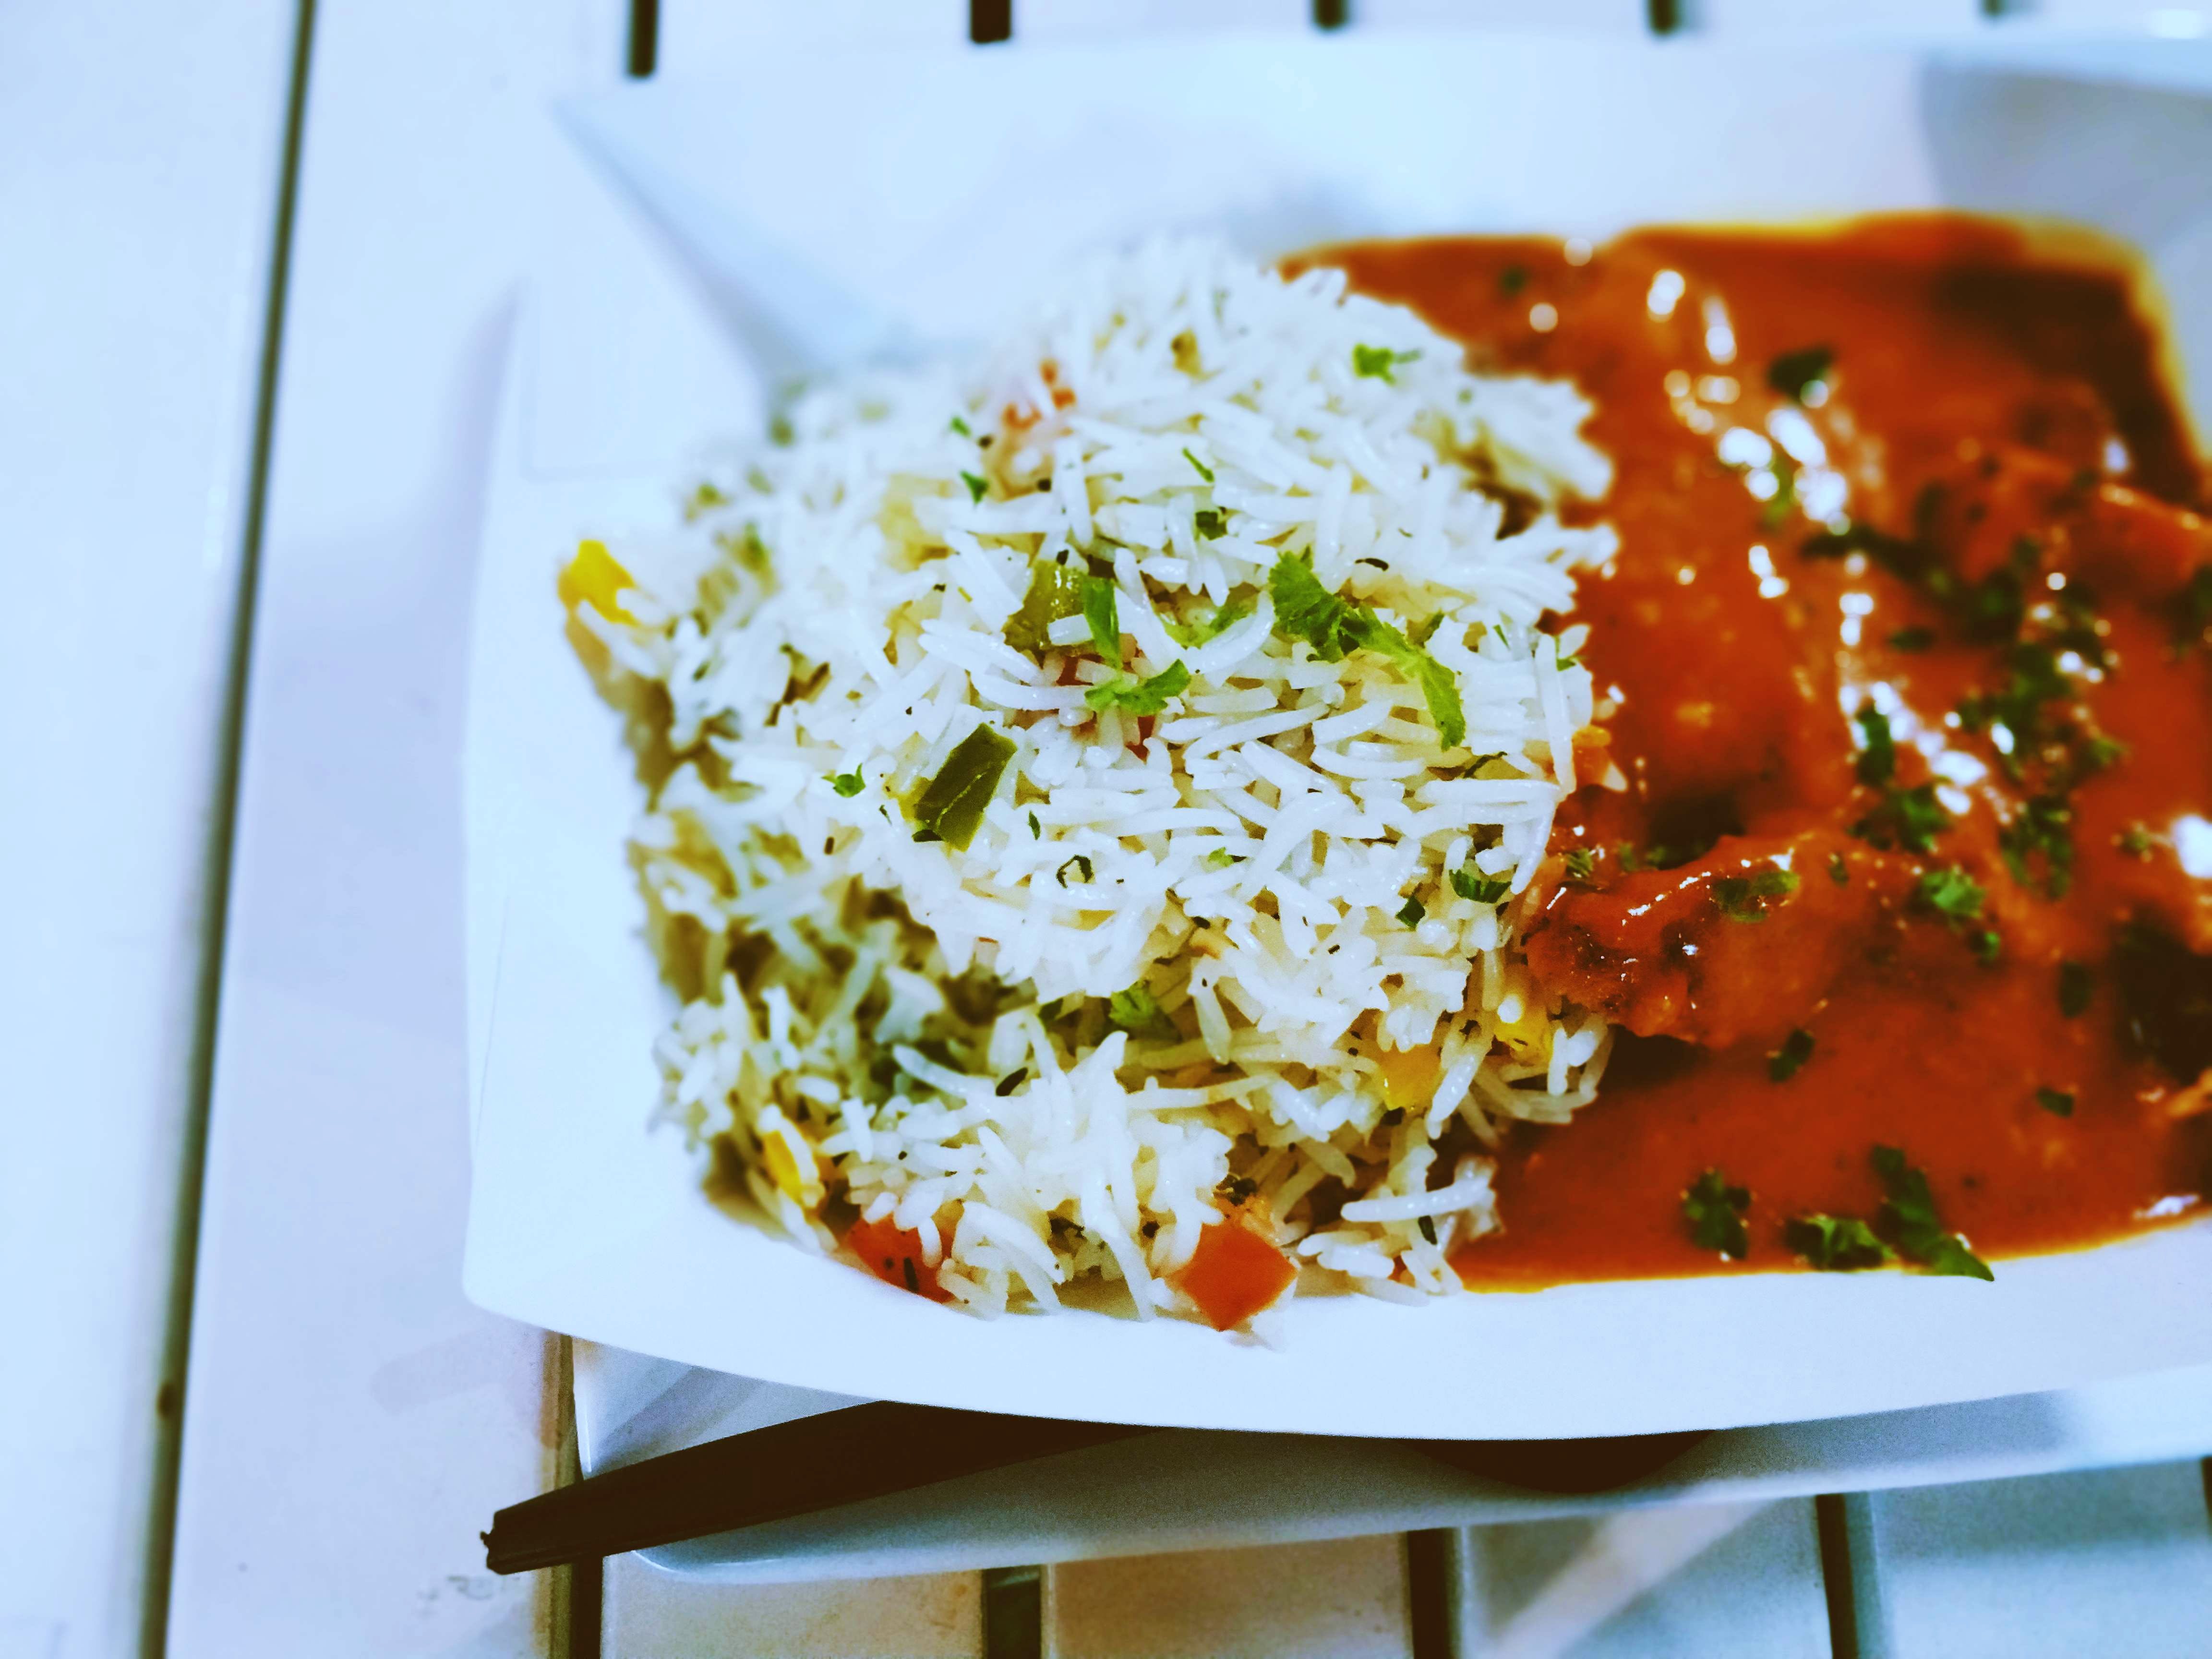 Dish,Cuisine,Food,Ingredient,Produce,Recipe,Grated cheese,Indian cuisine,Comfort food